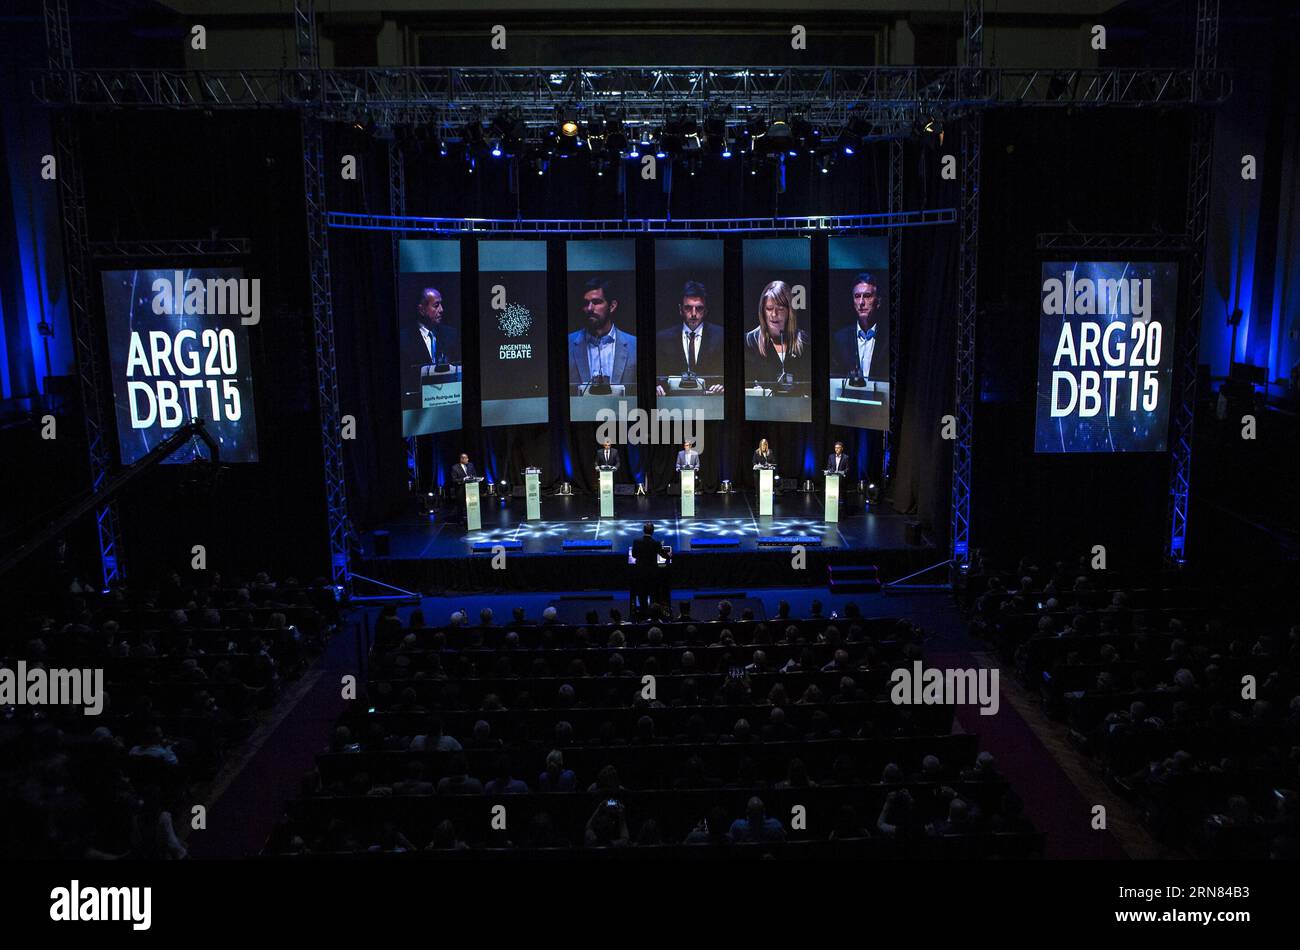 (151005) -- BUENOS AIRES, Oct. 5, 2015 -- The Presidential candidates of Compromiso Federal take part in the Presidential debate Argentina Debate 2015 , in the assembly hall of the Law Faculty of the Buenos Aires University, in Buenos Aires city, Argentina, on Oct. 4, 2015. Martin Zabala) ARGENTINA-BUENOS AIRES-POLITICS-DEBATE e MARTINxZABALA PUBLICATIONxNOTxINxCHN   Buenos Aires OCT 5 2015 The Presidential Candidates of compromiso Federal Take Part in The Presidential Debate Argentina Debate 2015 in The Assembly Hall of The Law faculty of The Buenos Aires University in Buenos Aires City Argen Stock Photo